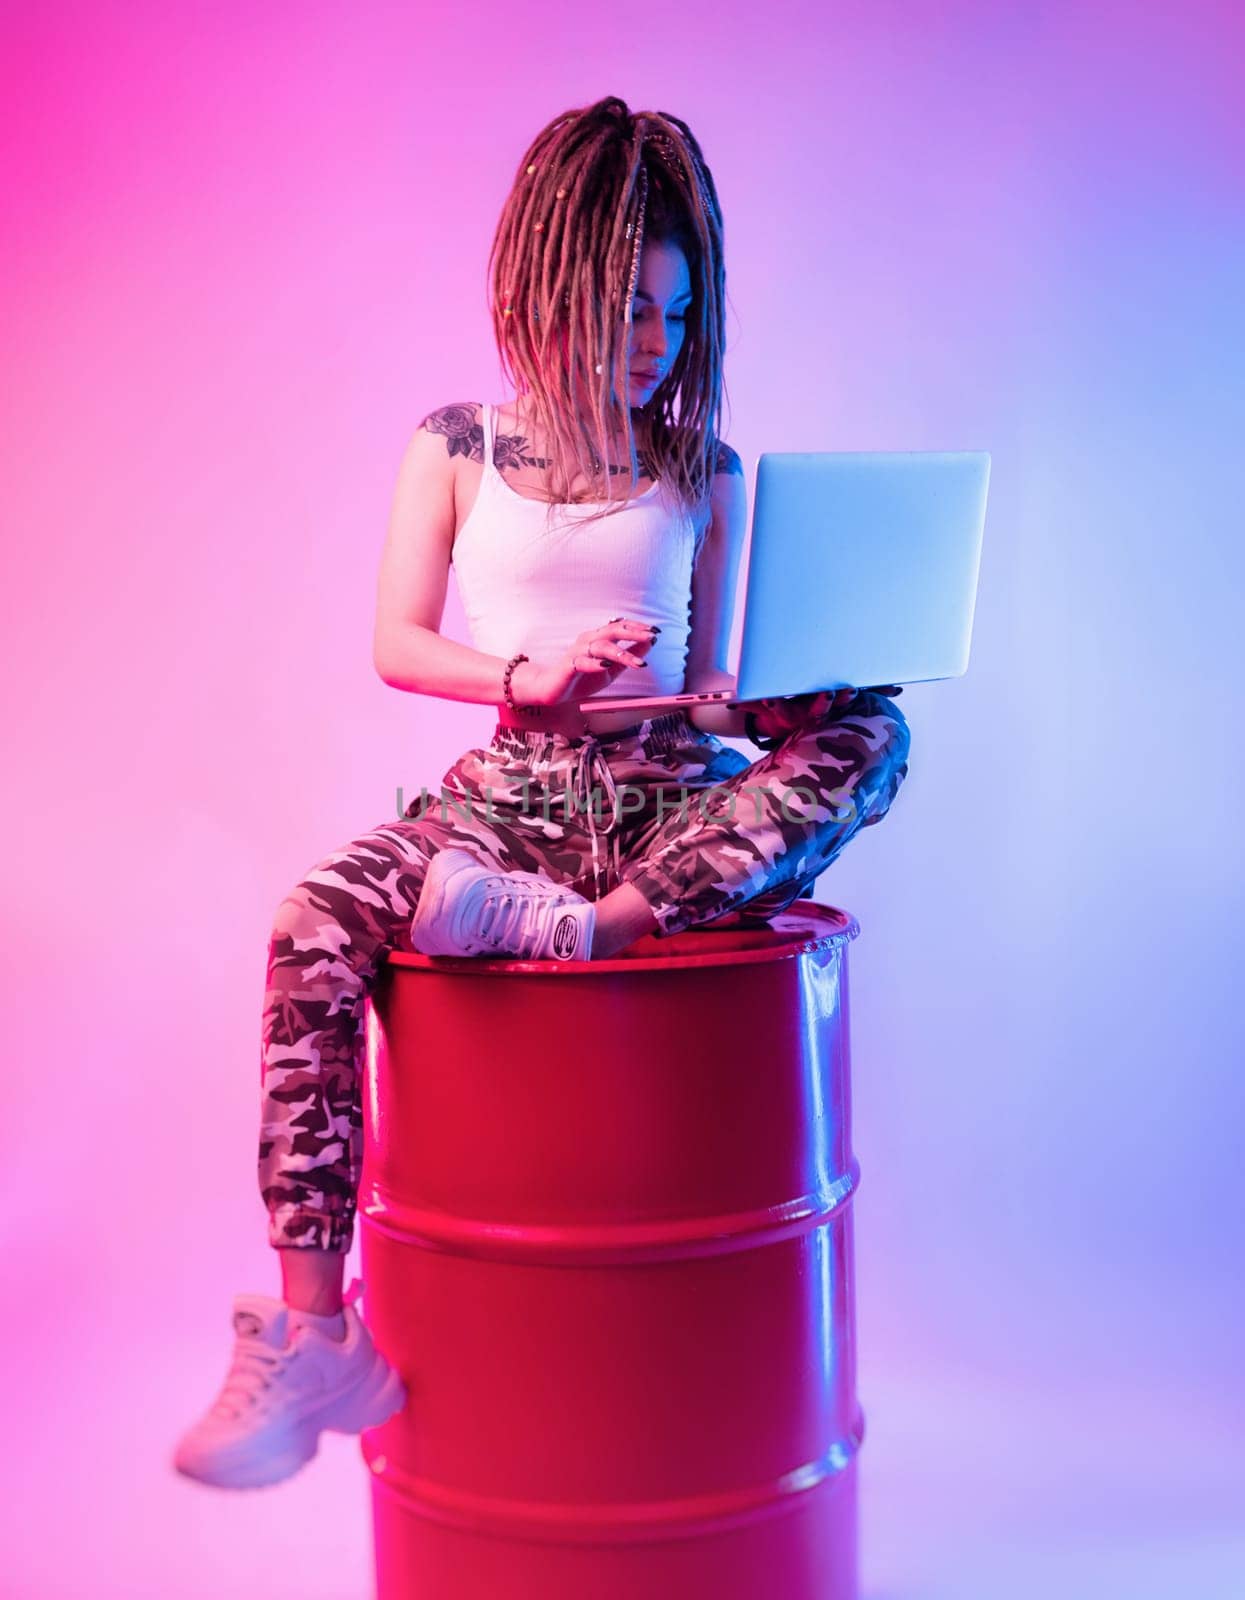 sexy girl with braids dreadlocks on her head in neon light with a laptop on a light background copy paste